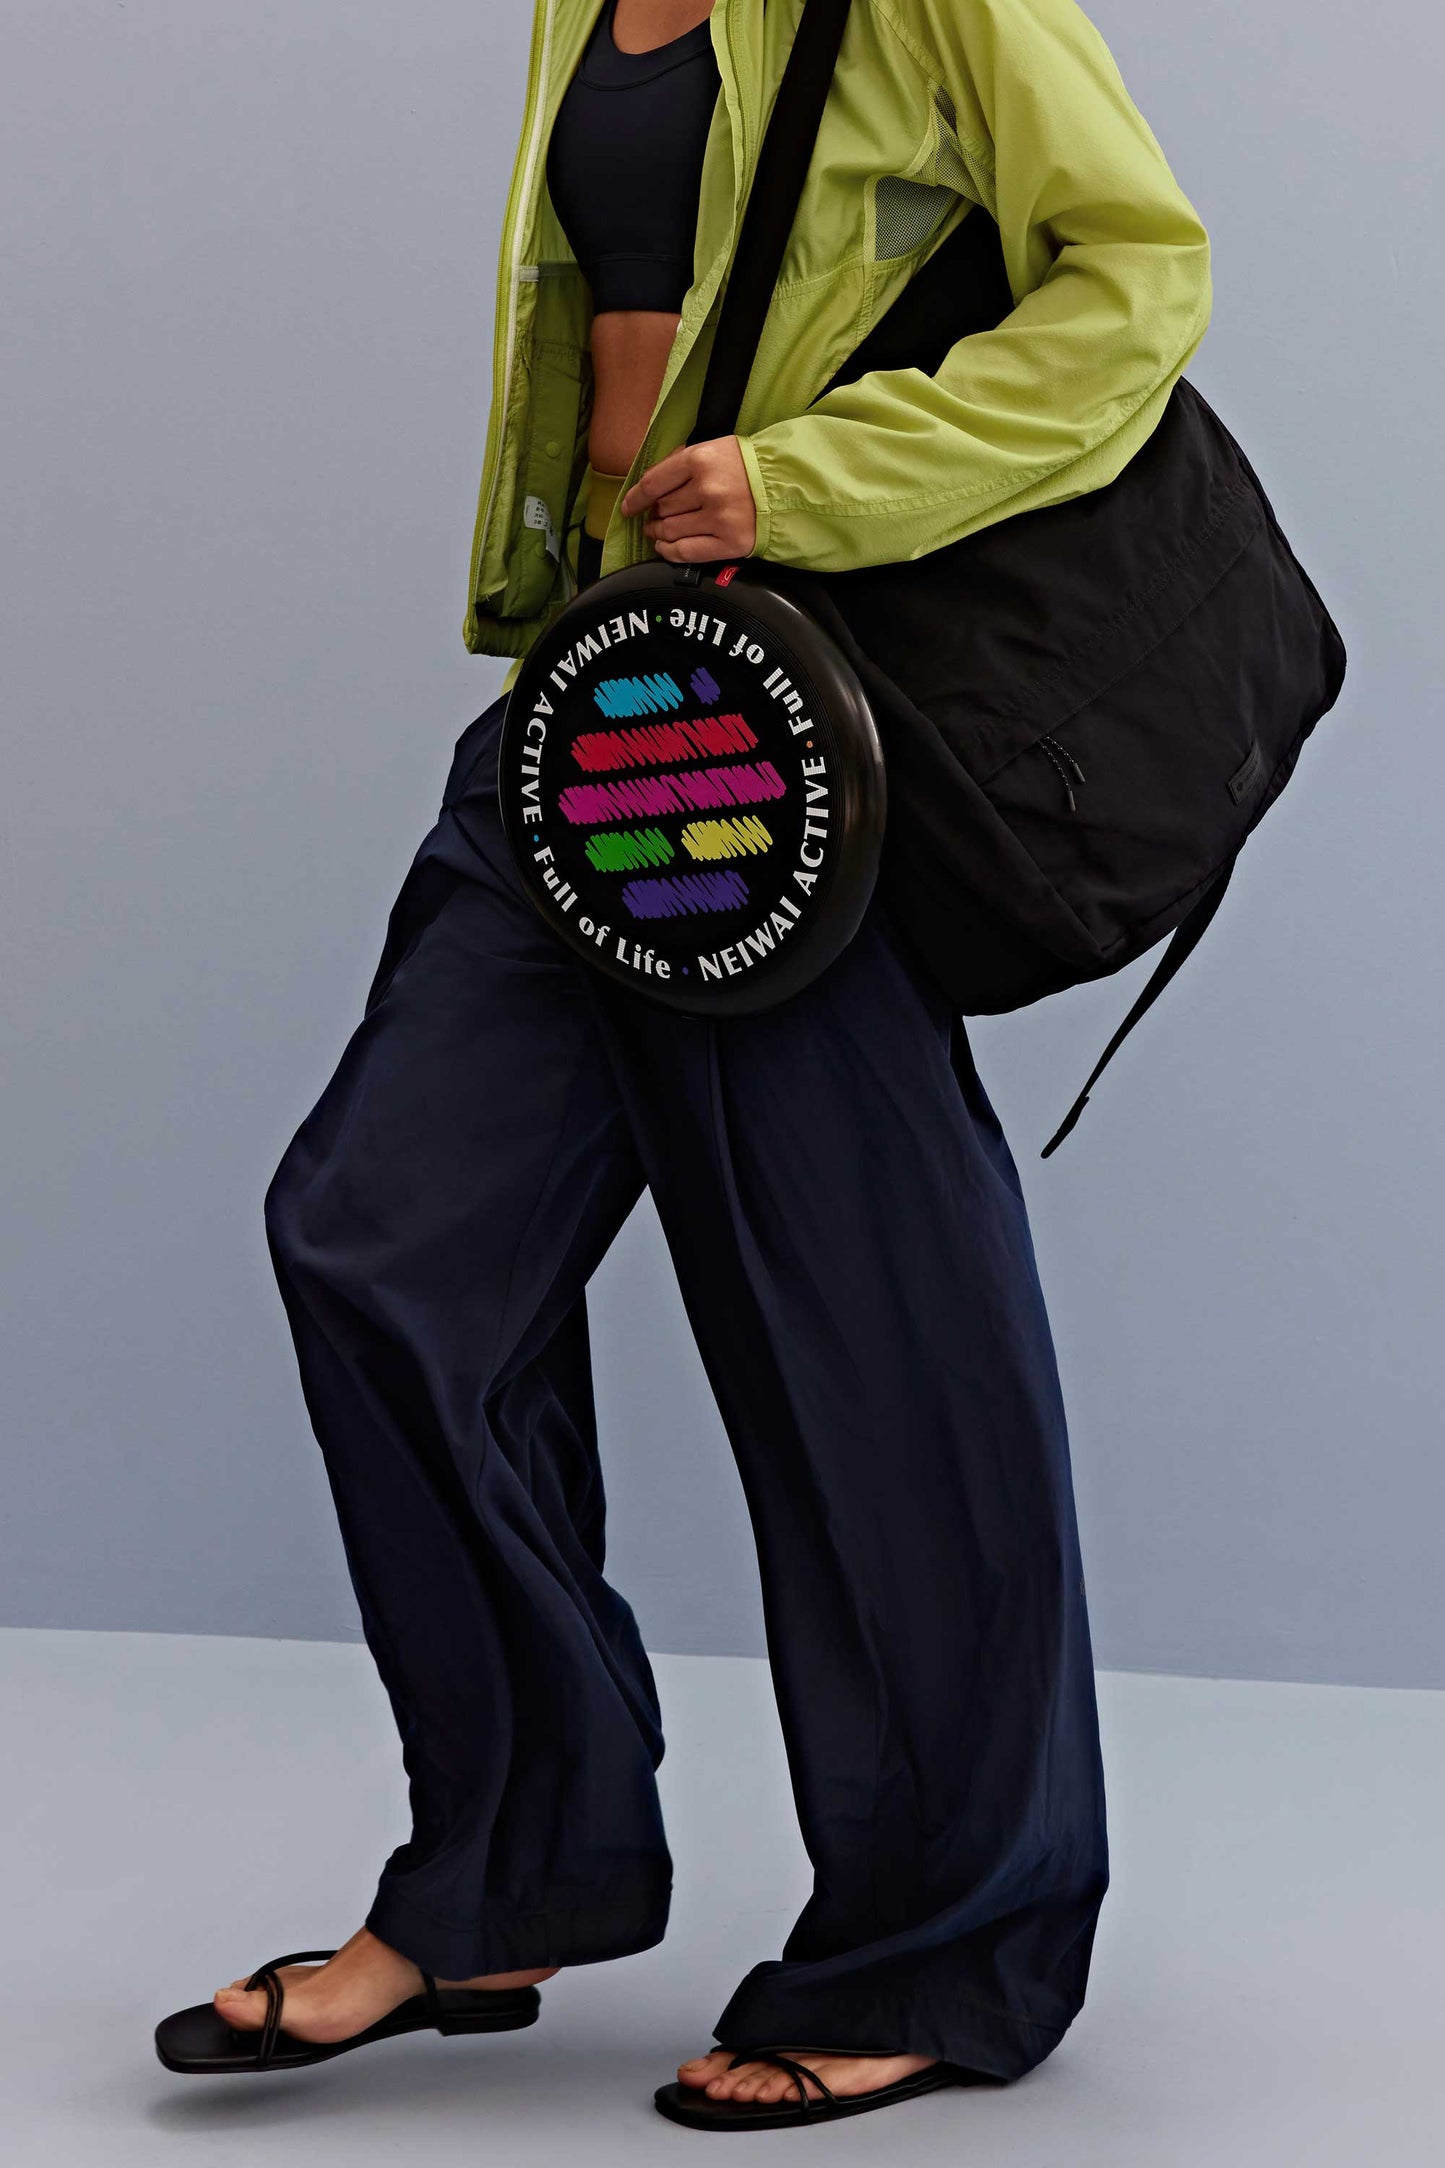 a woman wearing a green jacket and black sports bra under. pair with a navy pants and black bag